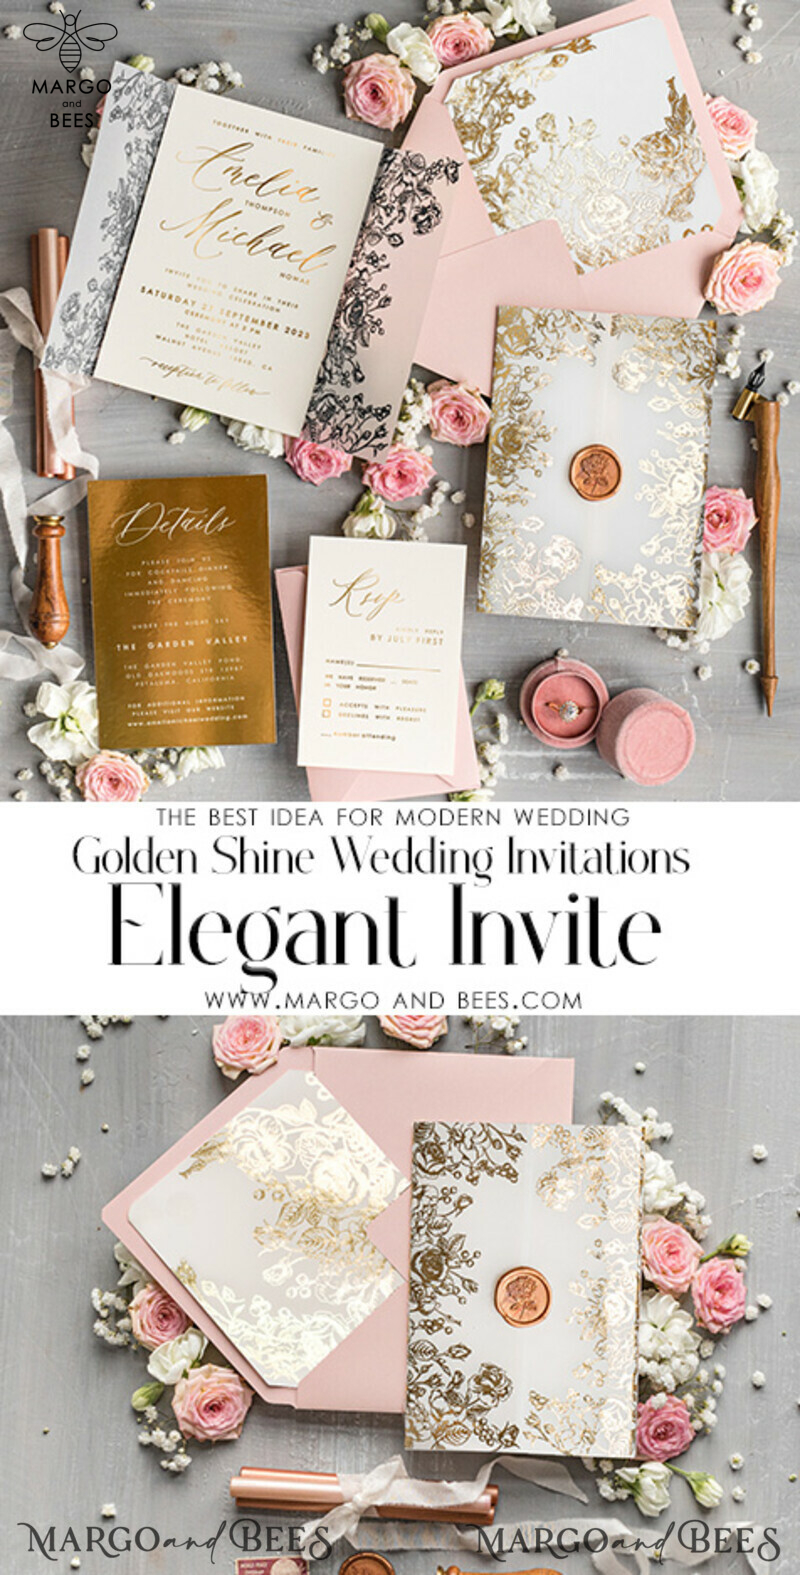 Elegant and Exclusive: Bespoke Blush Pink Wedding Invitations for a Glamourous Affair-3